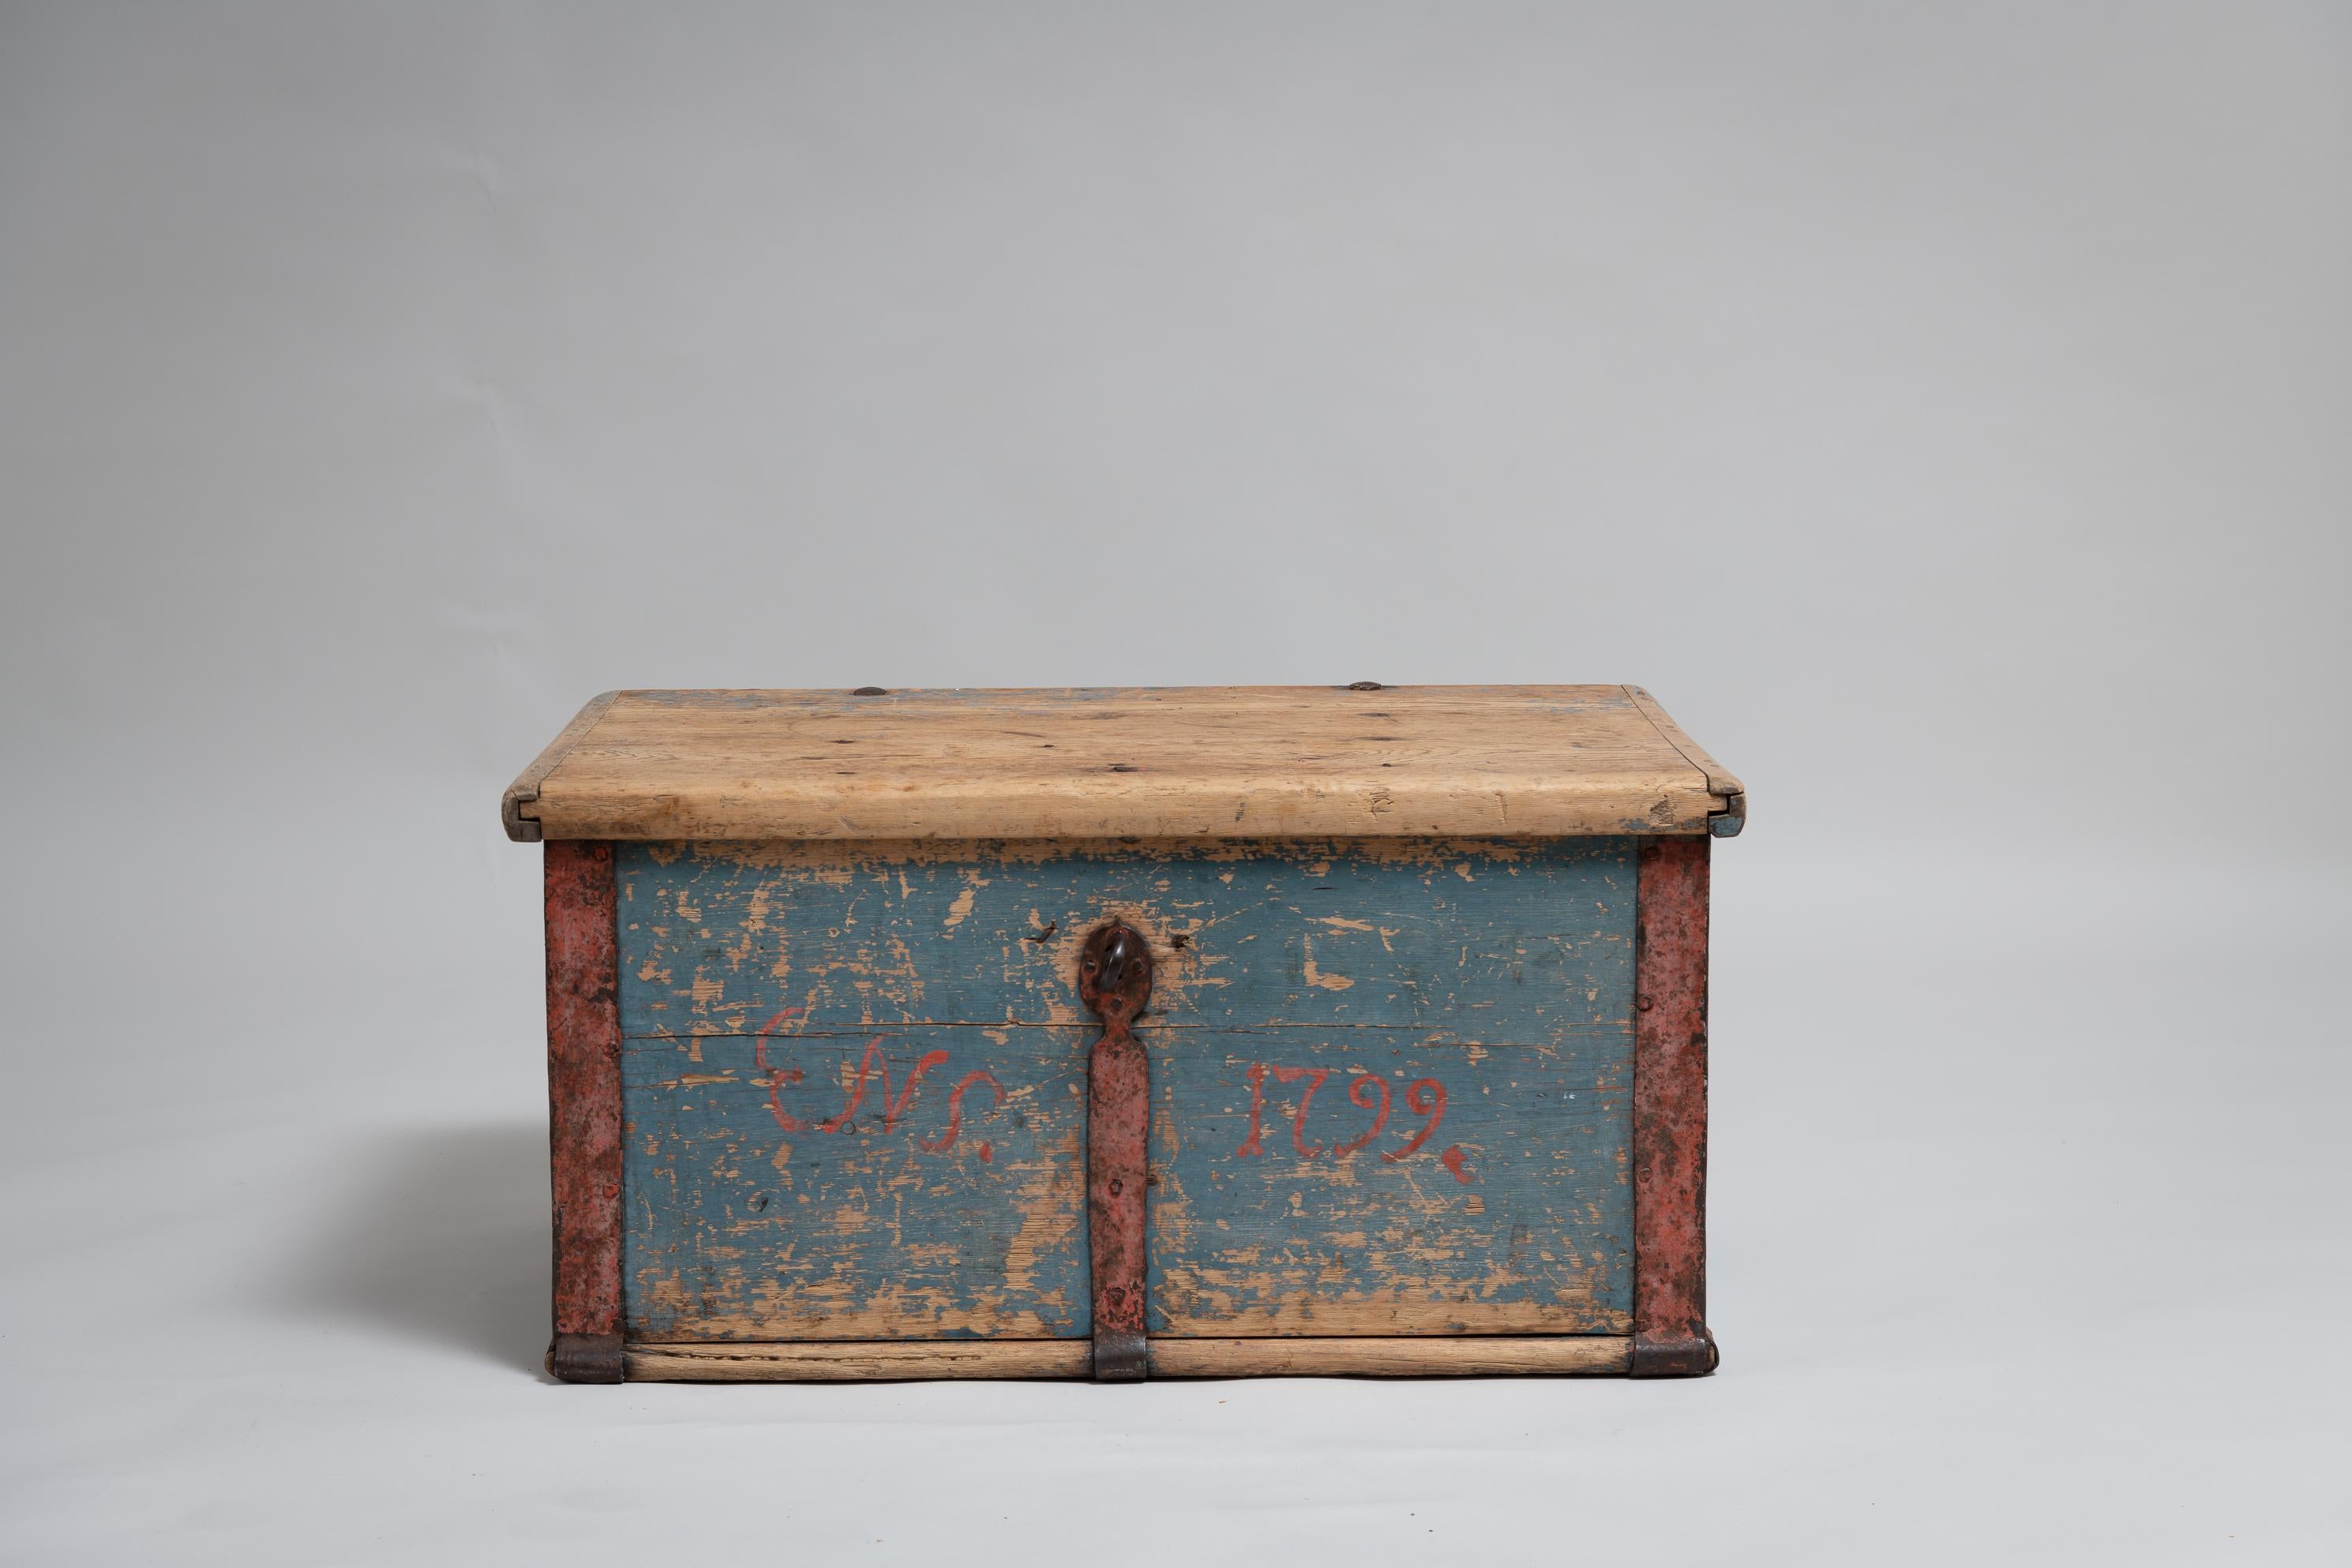 Northern Swedish blue Folk Art chest dated 1799 and monogrammed ENS. It’s very unusual to find such early datings and in this case it’s authentic. Untouched original condition with the original blue paint. Genuine patina and distress after use. From